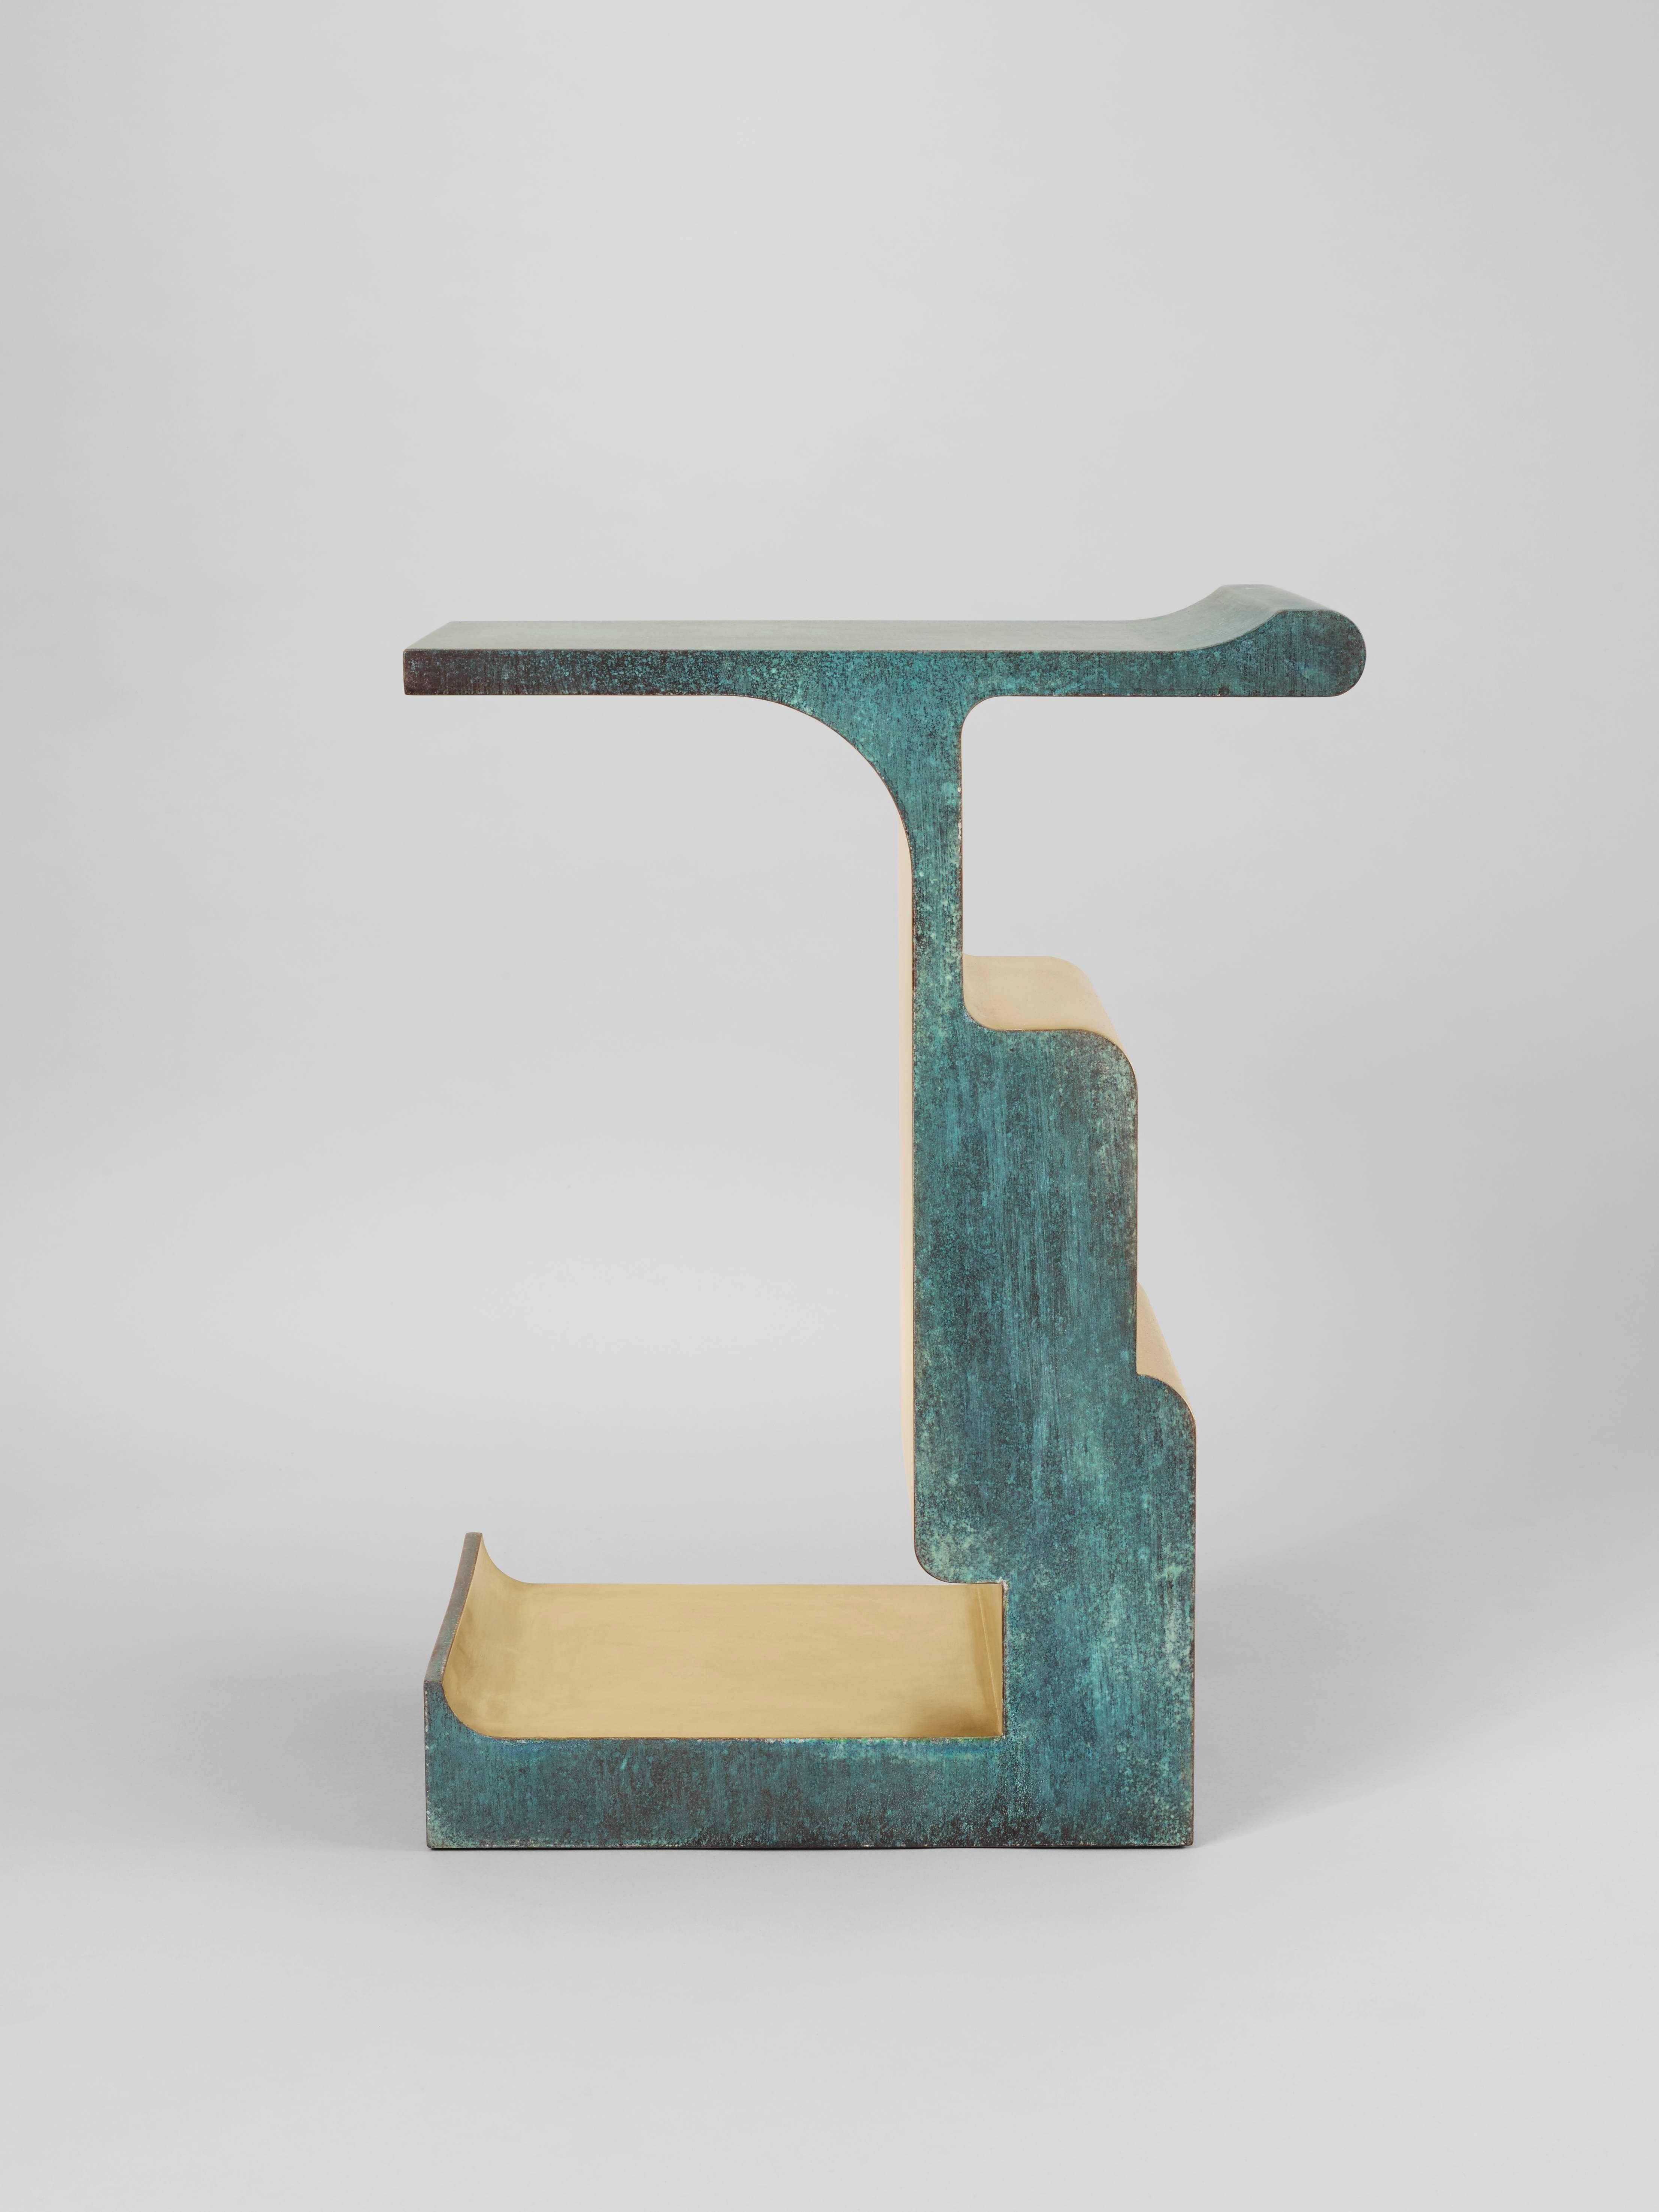 Chinese ‘XiangSheng I' Side Table #2, an Oxidized and Brushed Bronze Table by Studio MVW For Sale